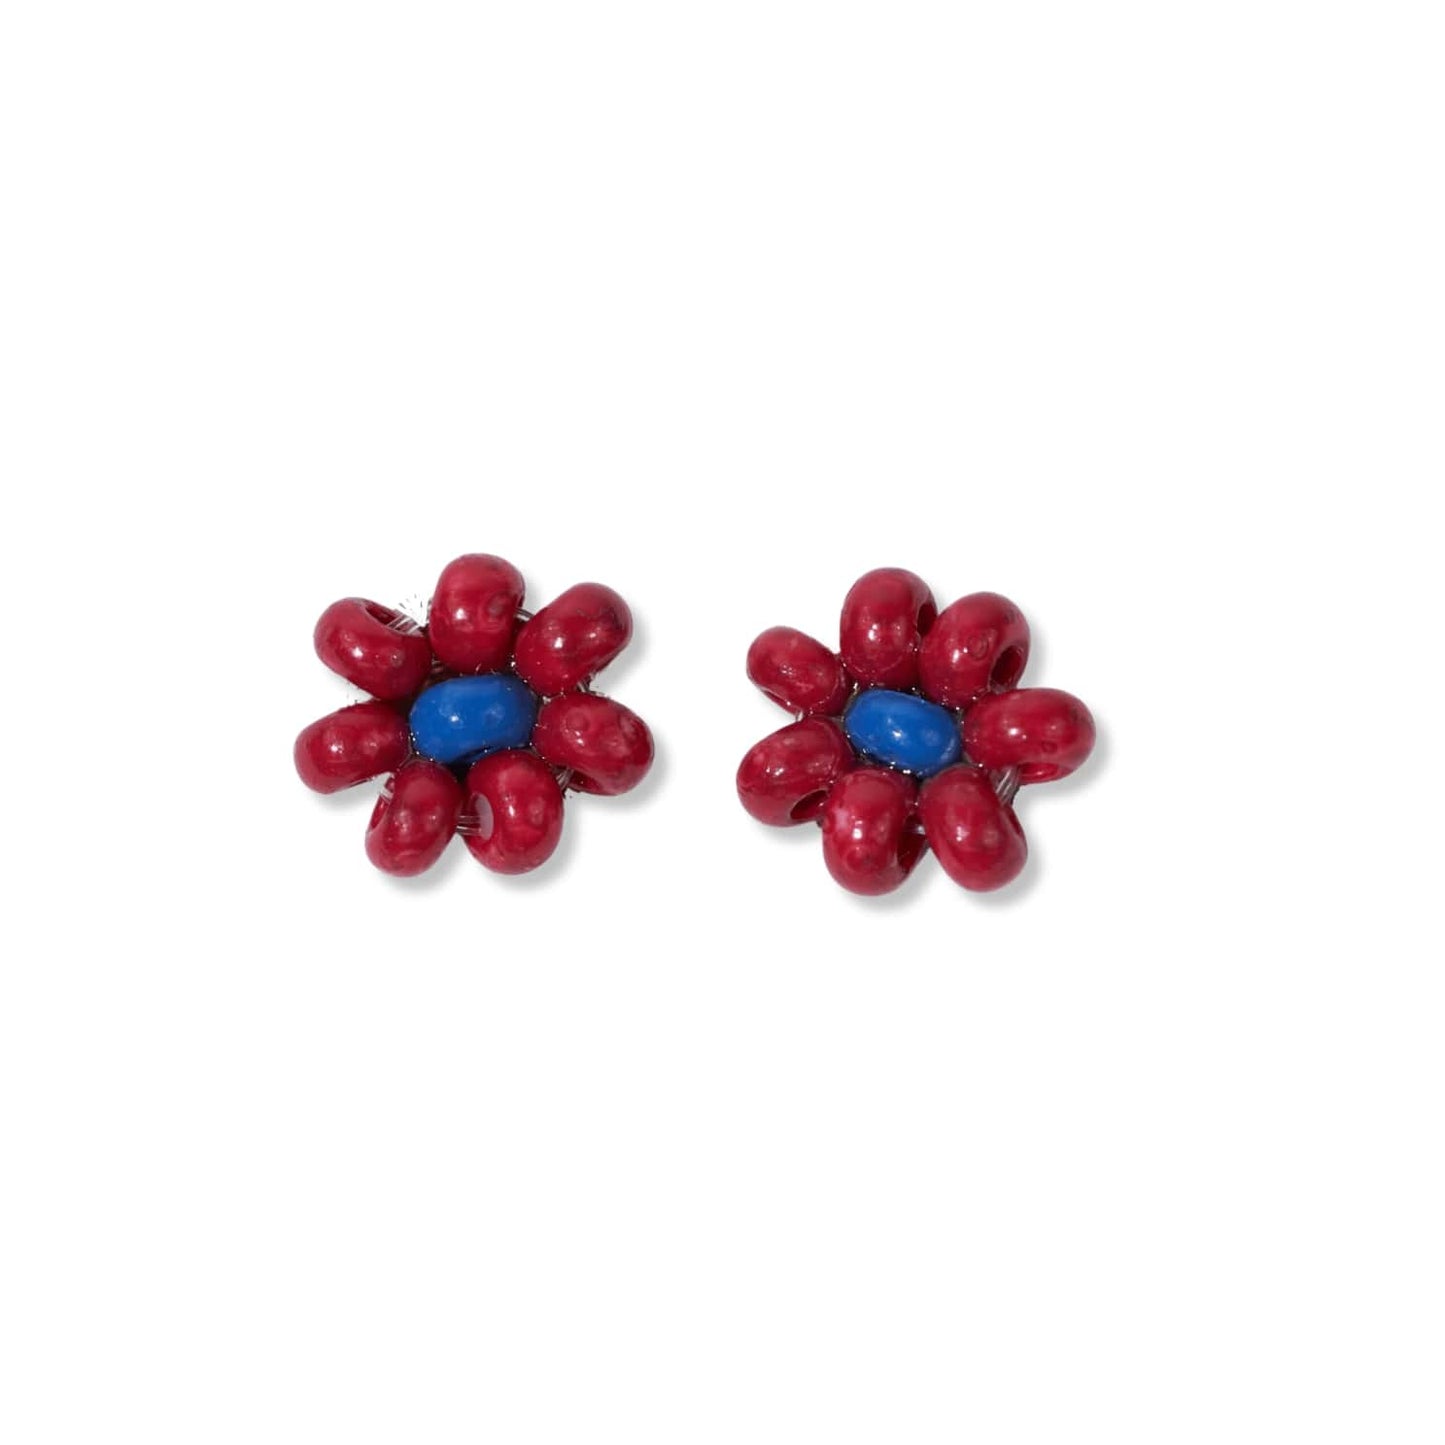 Tina two color beaded post earrings red + blue Earrings